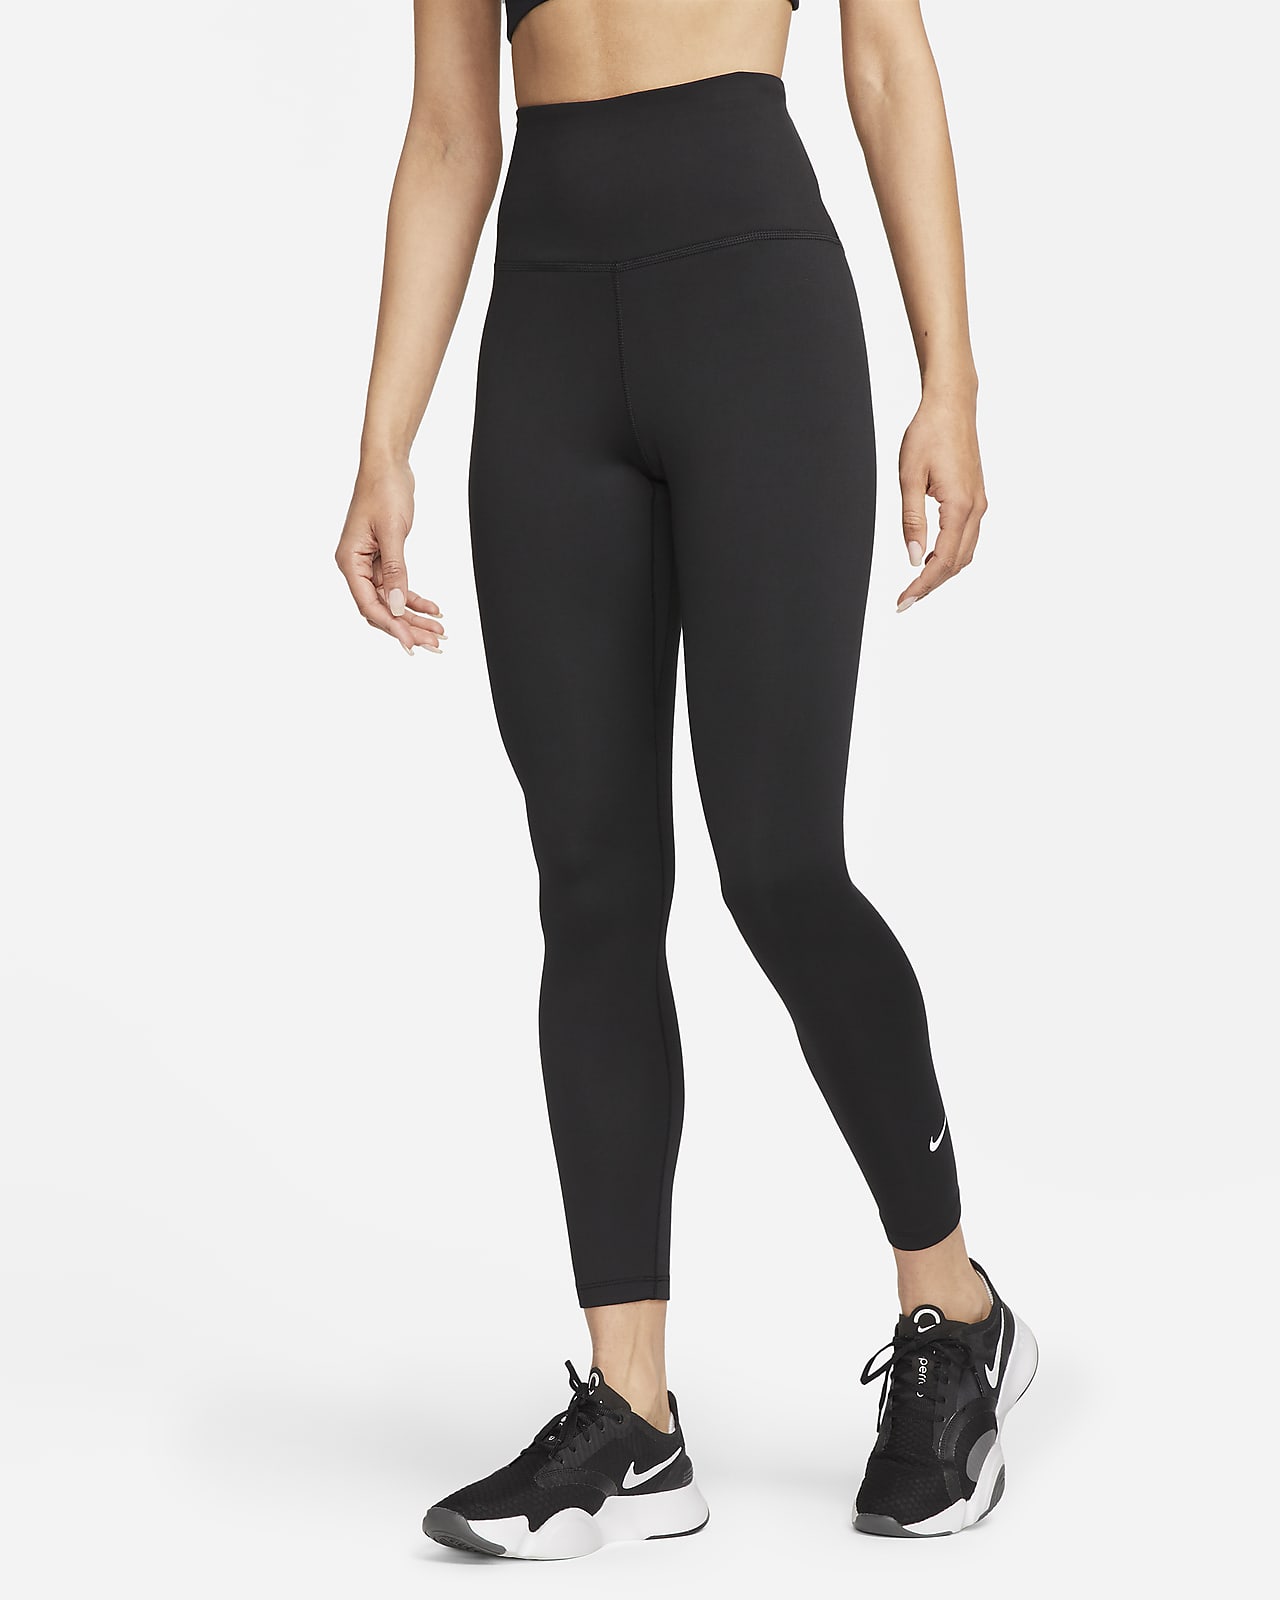 Nike Therma-FIT One Women\'s High-Waisted Leggings. 7/8